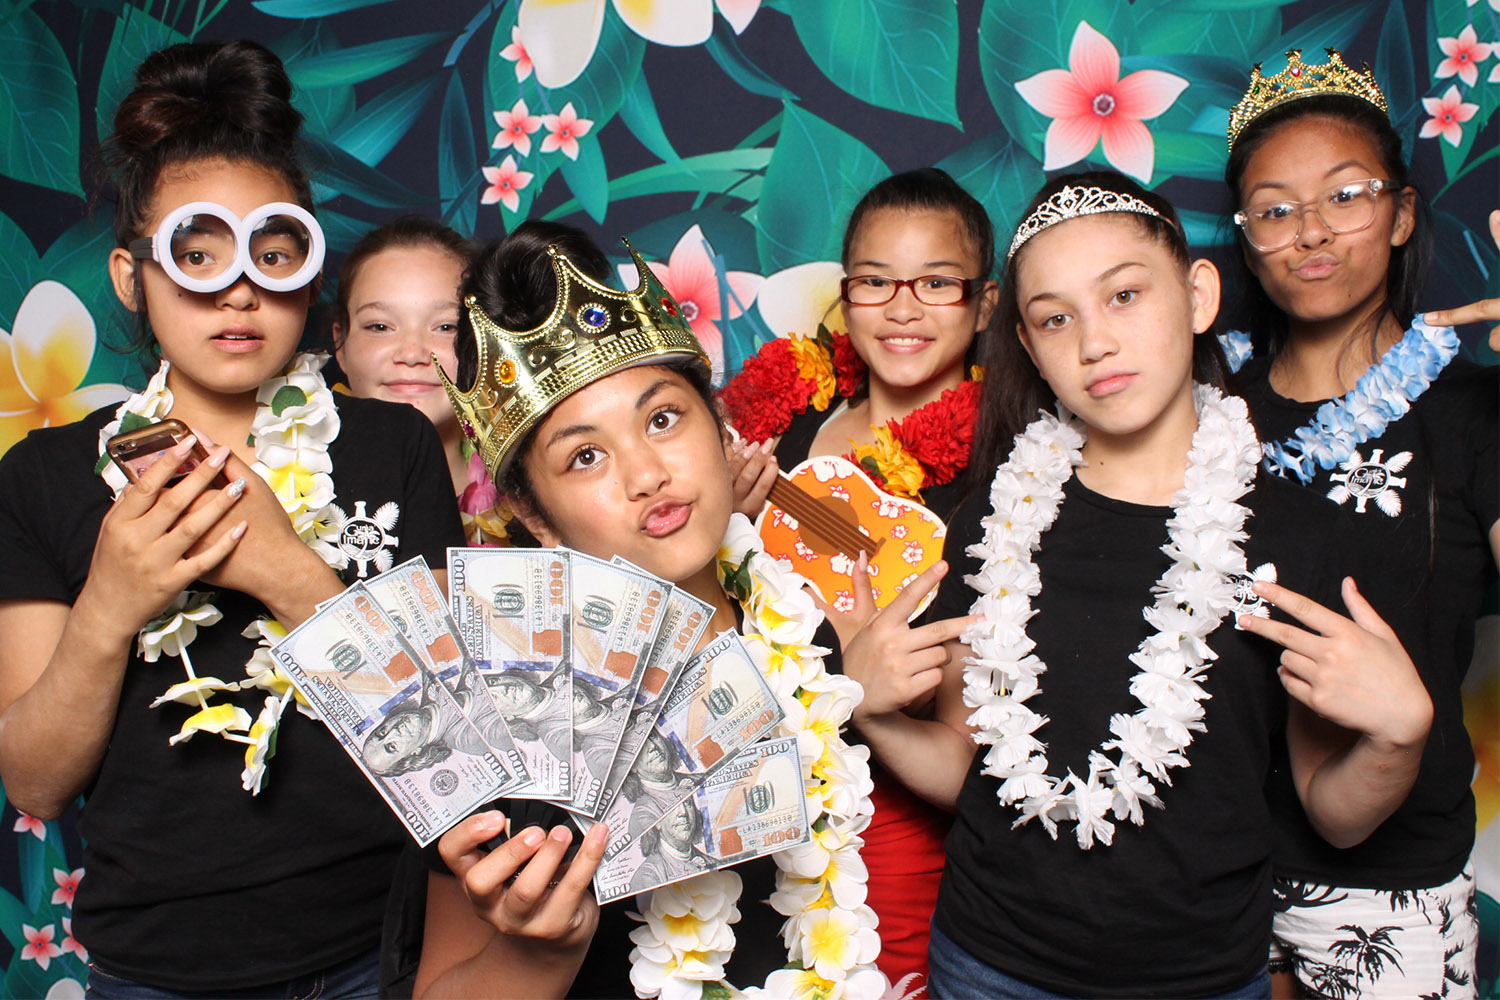 Photo Booth Rental Prices - Photobooth Guys Photo Booth Rental